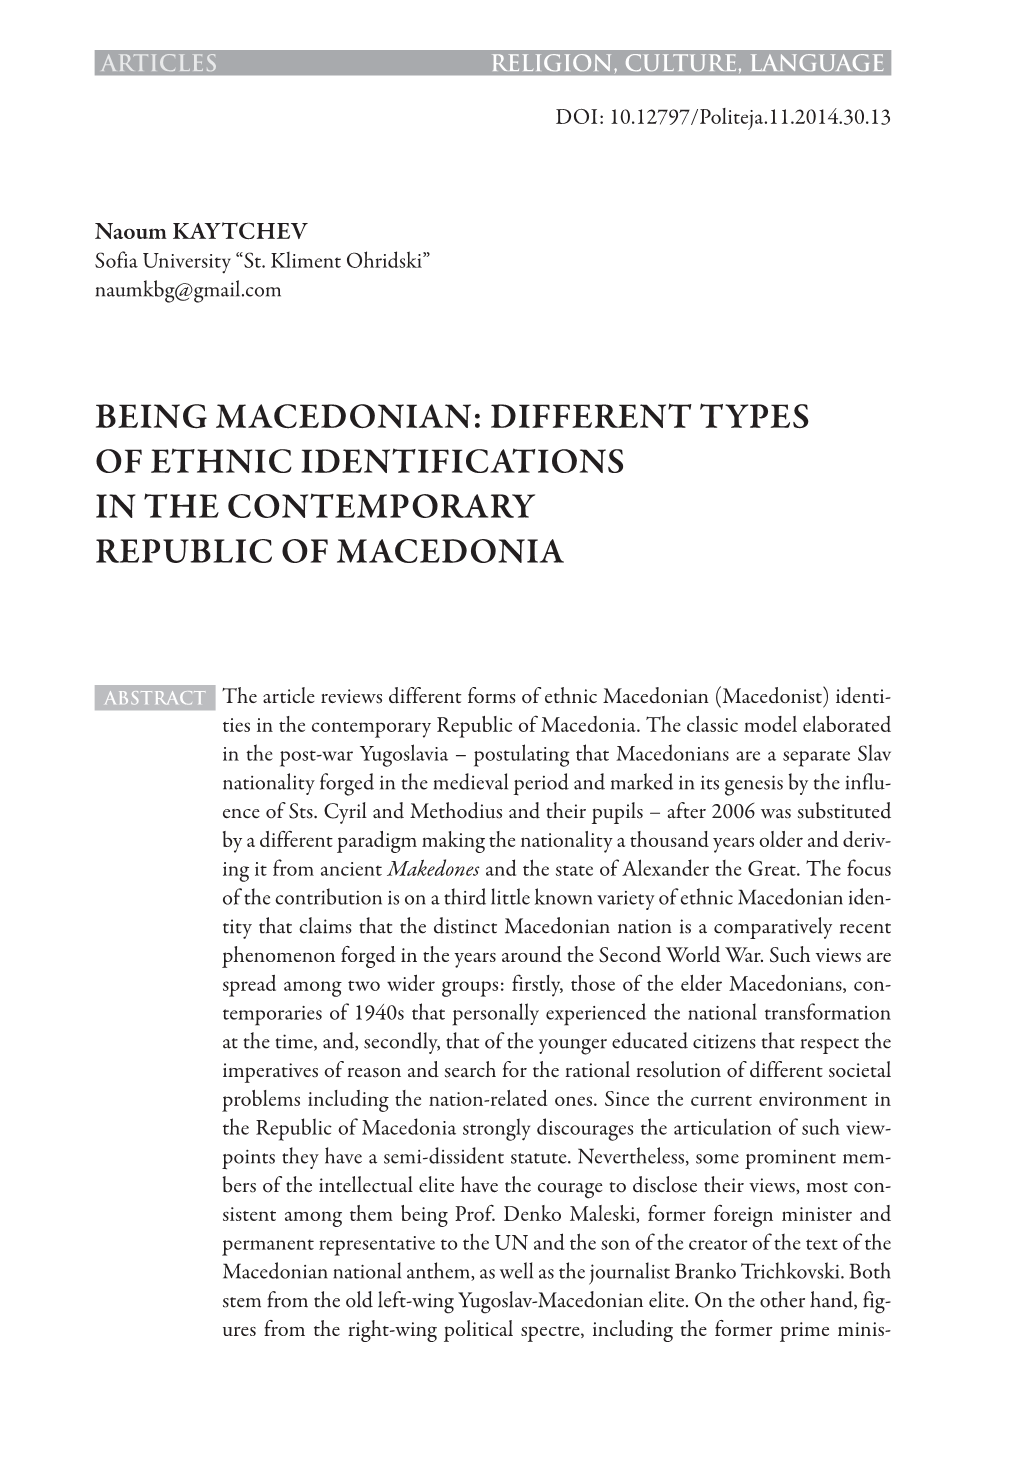 Being Macedonian: Different Types of Ethnic Identifications in the Contemporary Republic of Macedonia